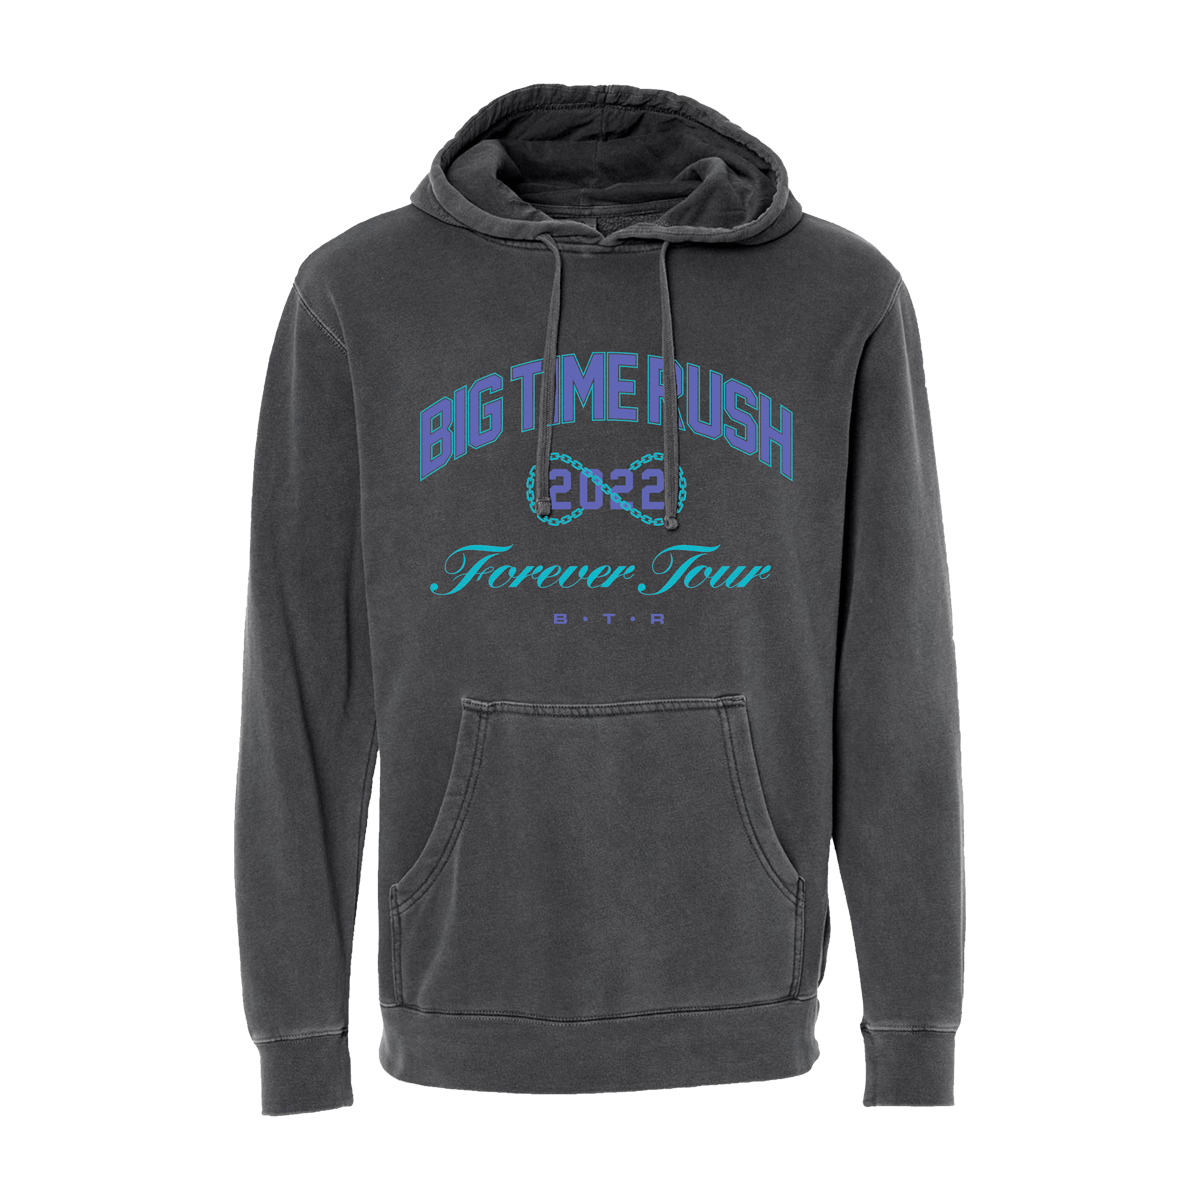 Forever Tour Hoodie-Big Time Rush